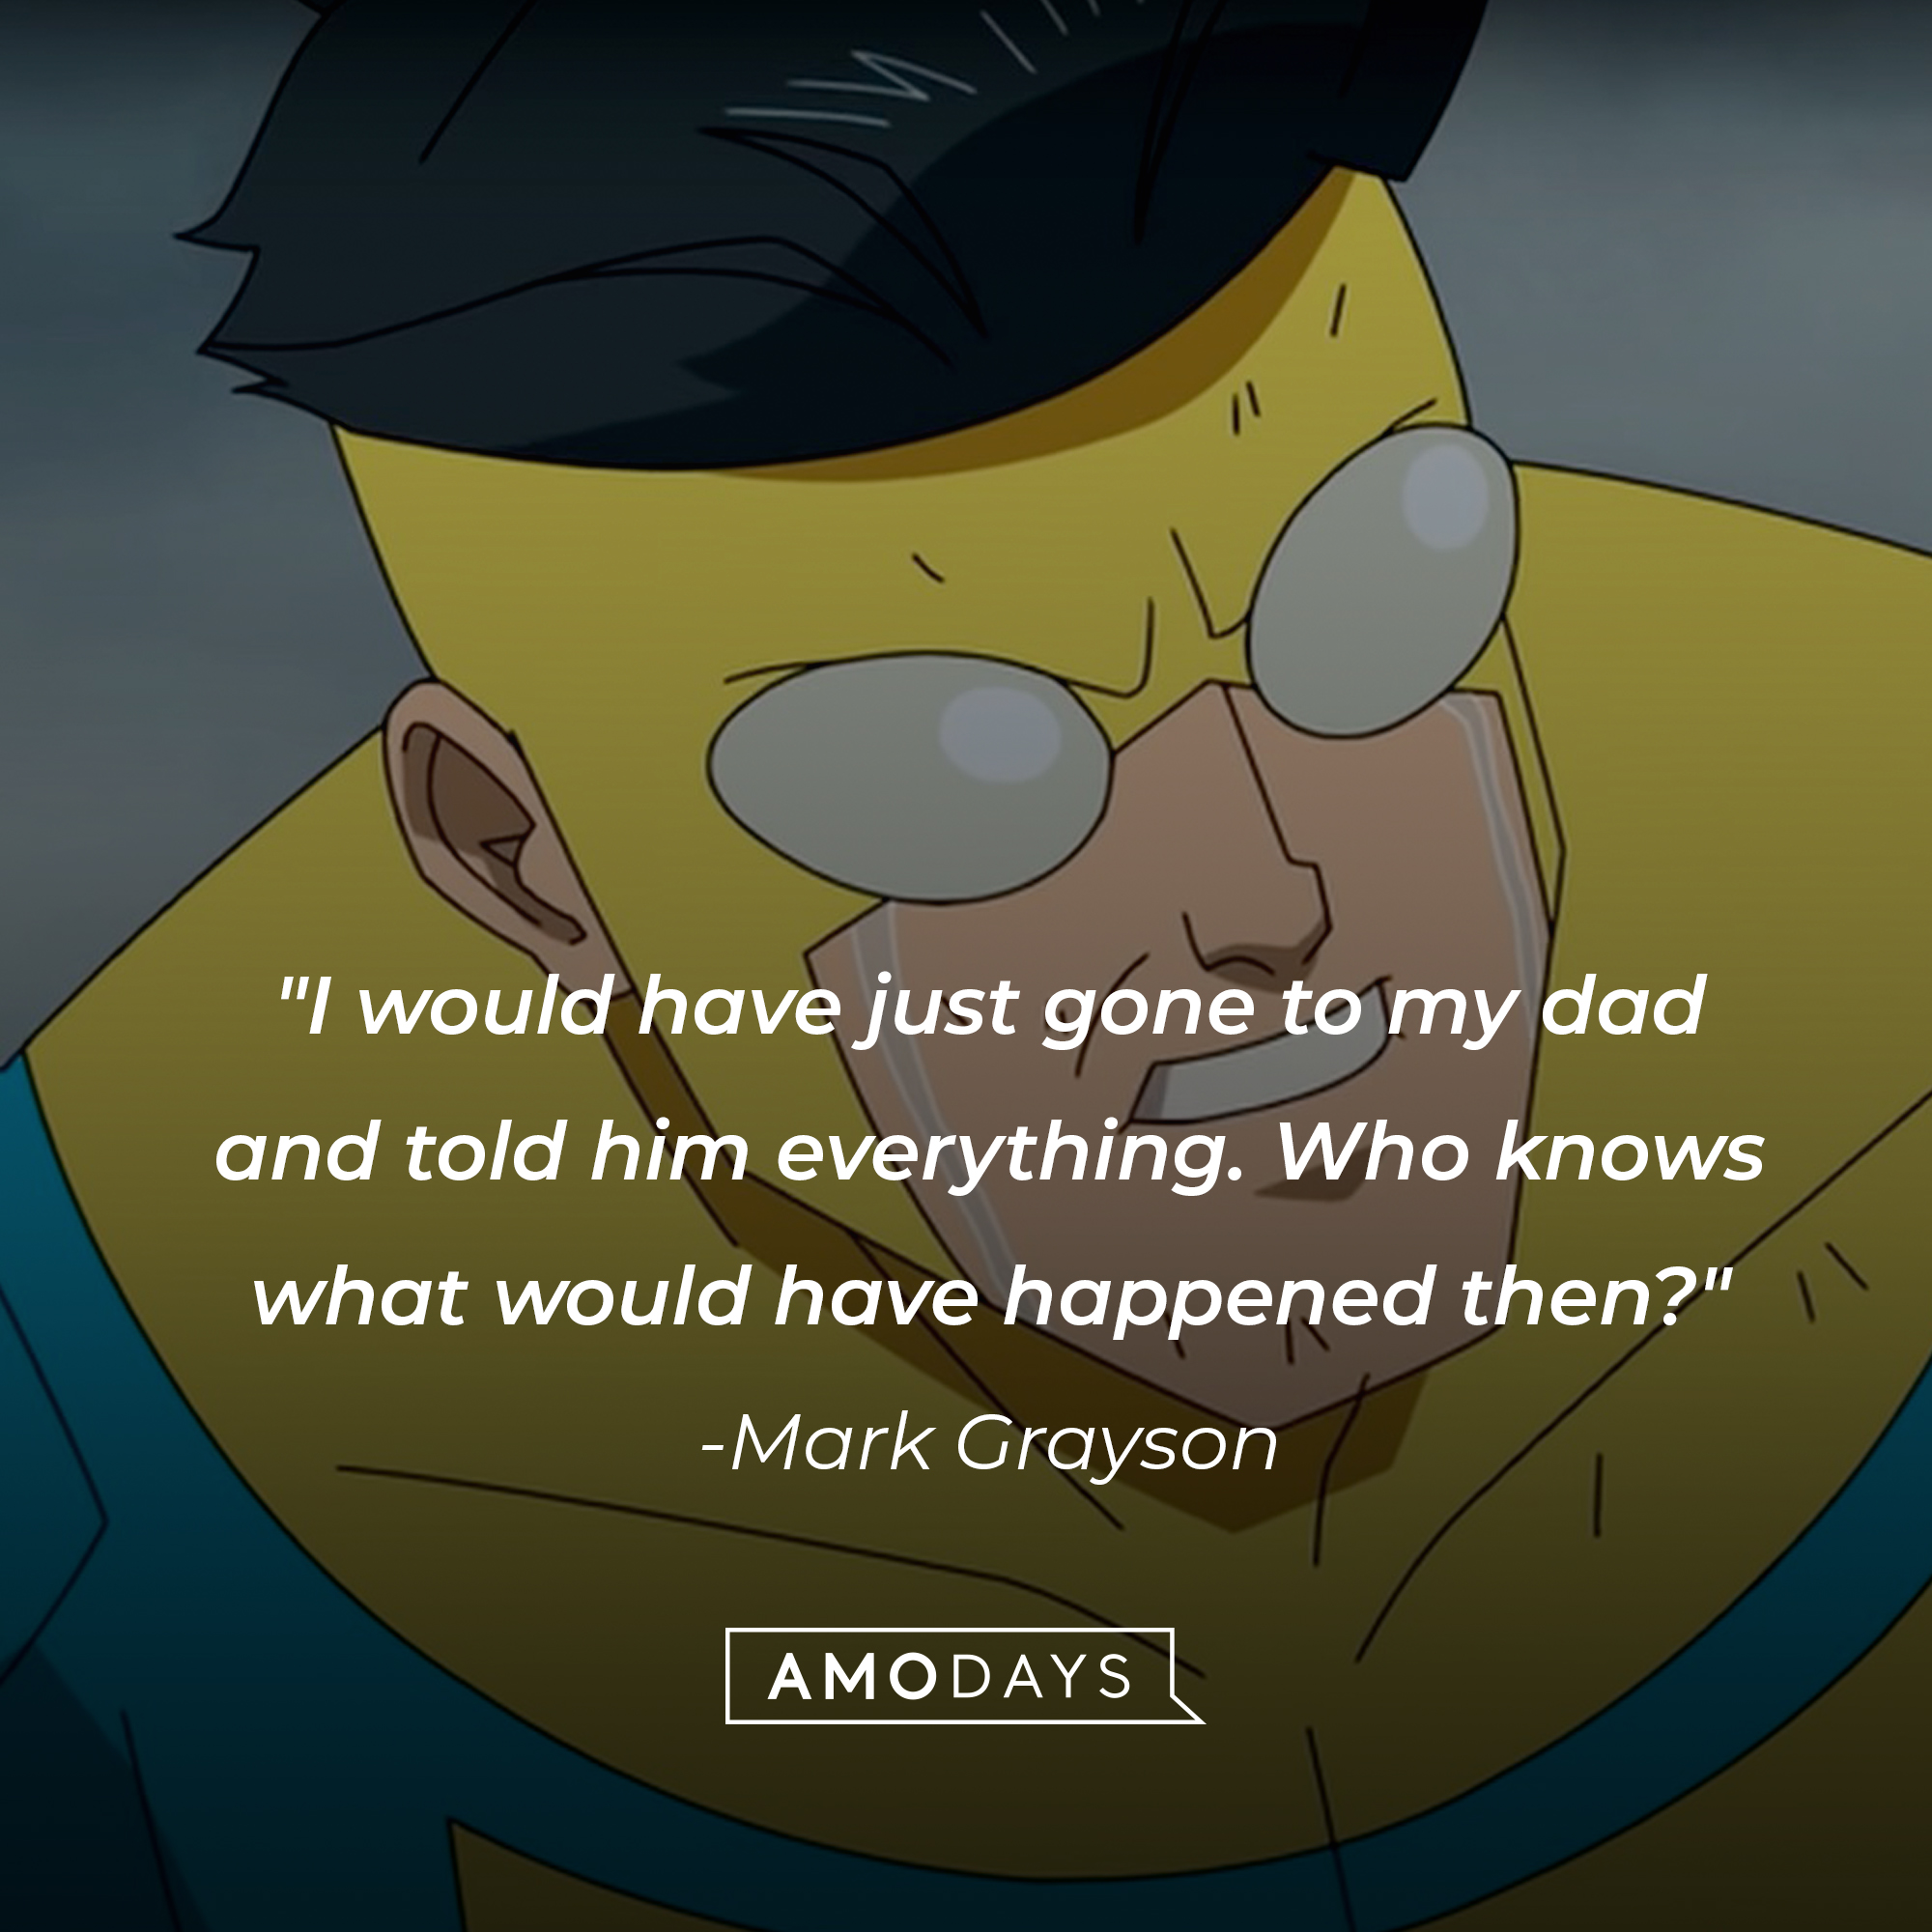 Mark Grayson's quote: "I would have just gone to my dad and told him everything. Who knows what would have happened then?" | Source: Facebook.com/Invincibleuniverse